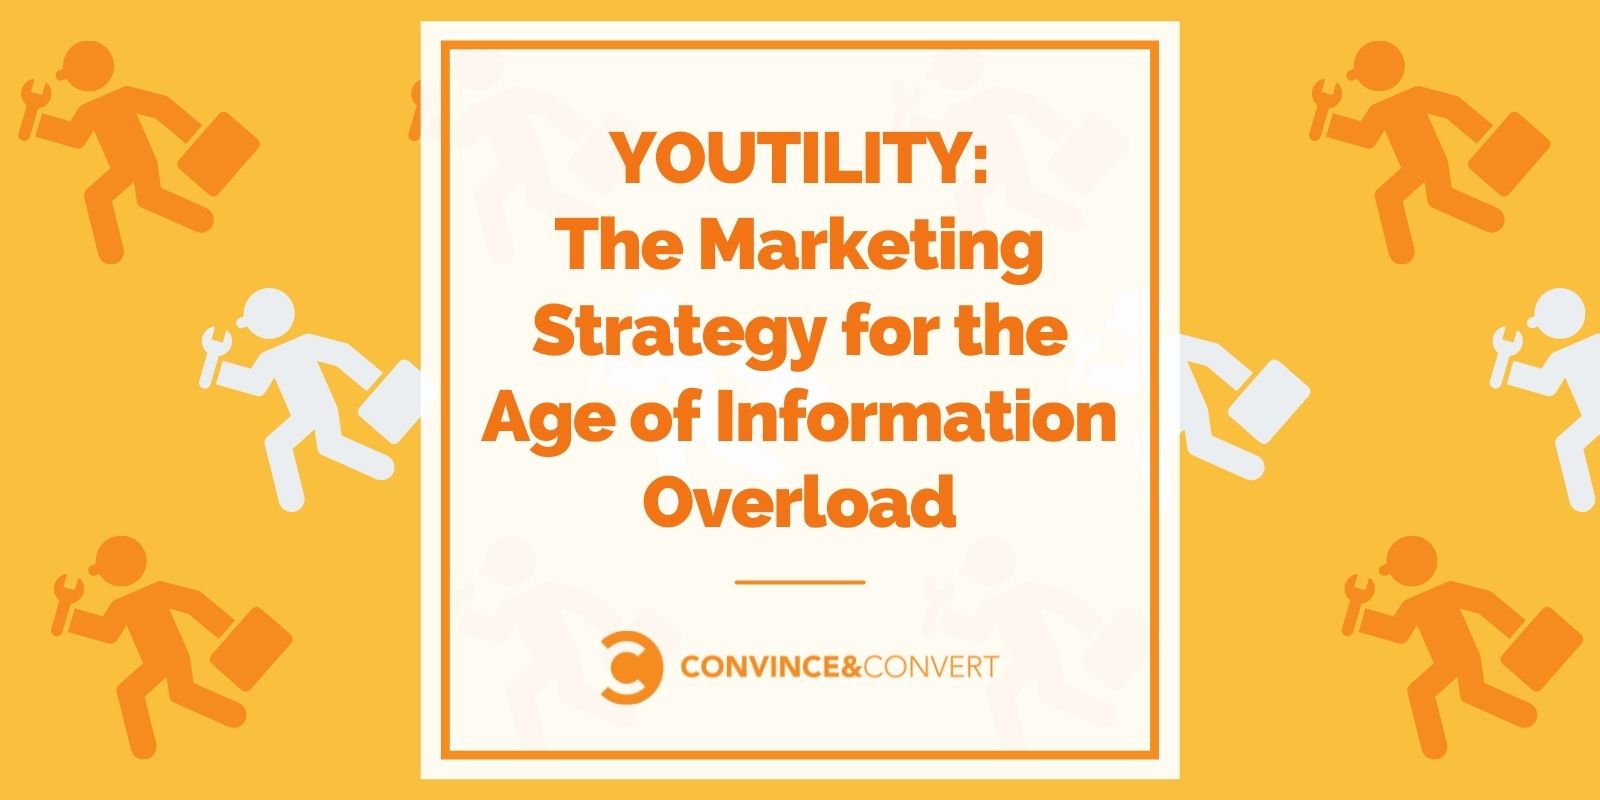 Youtility by Jay Baer – The Marketing Strategy for the Age of Information Overload